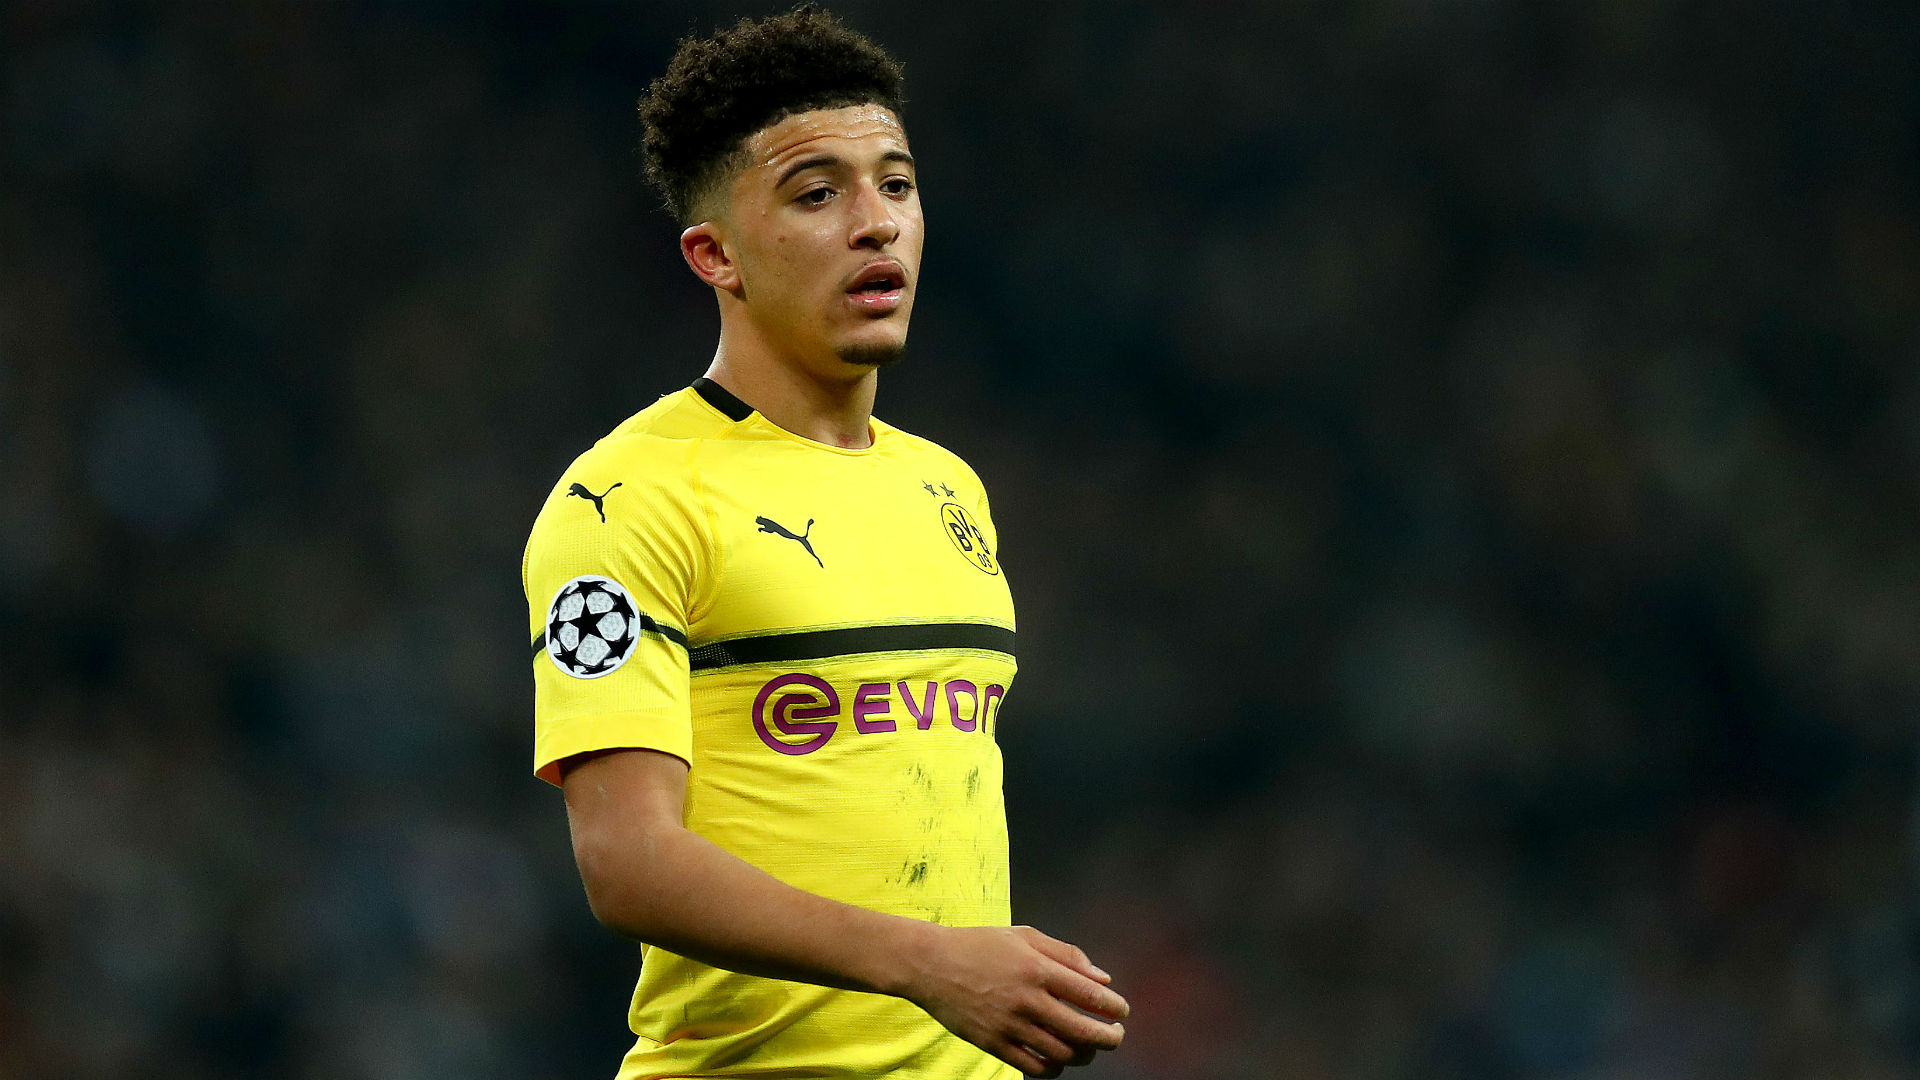 Jadon Sancho could have been playing for Liverpool if Jurgen Klopp had his way, but he claims Manchester City refused to sell him.